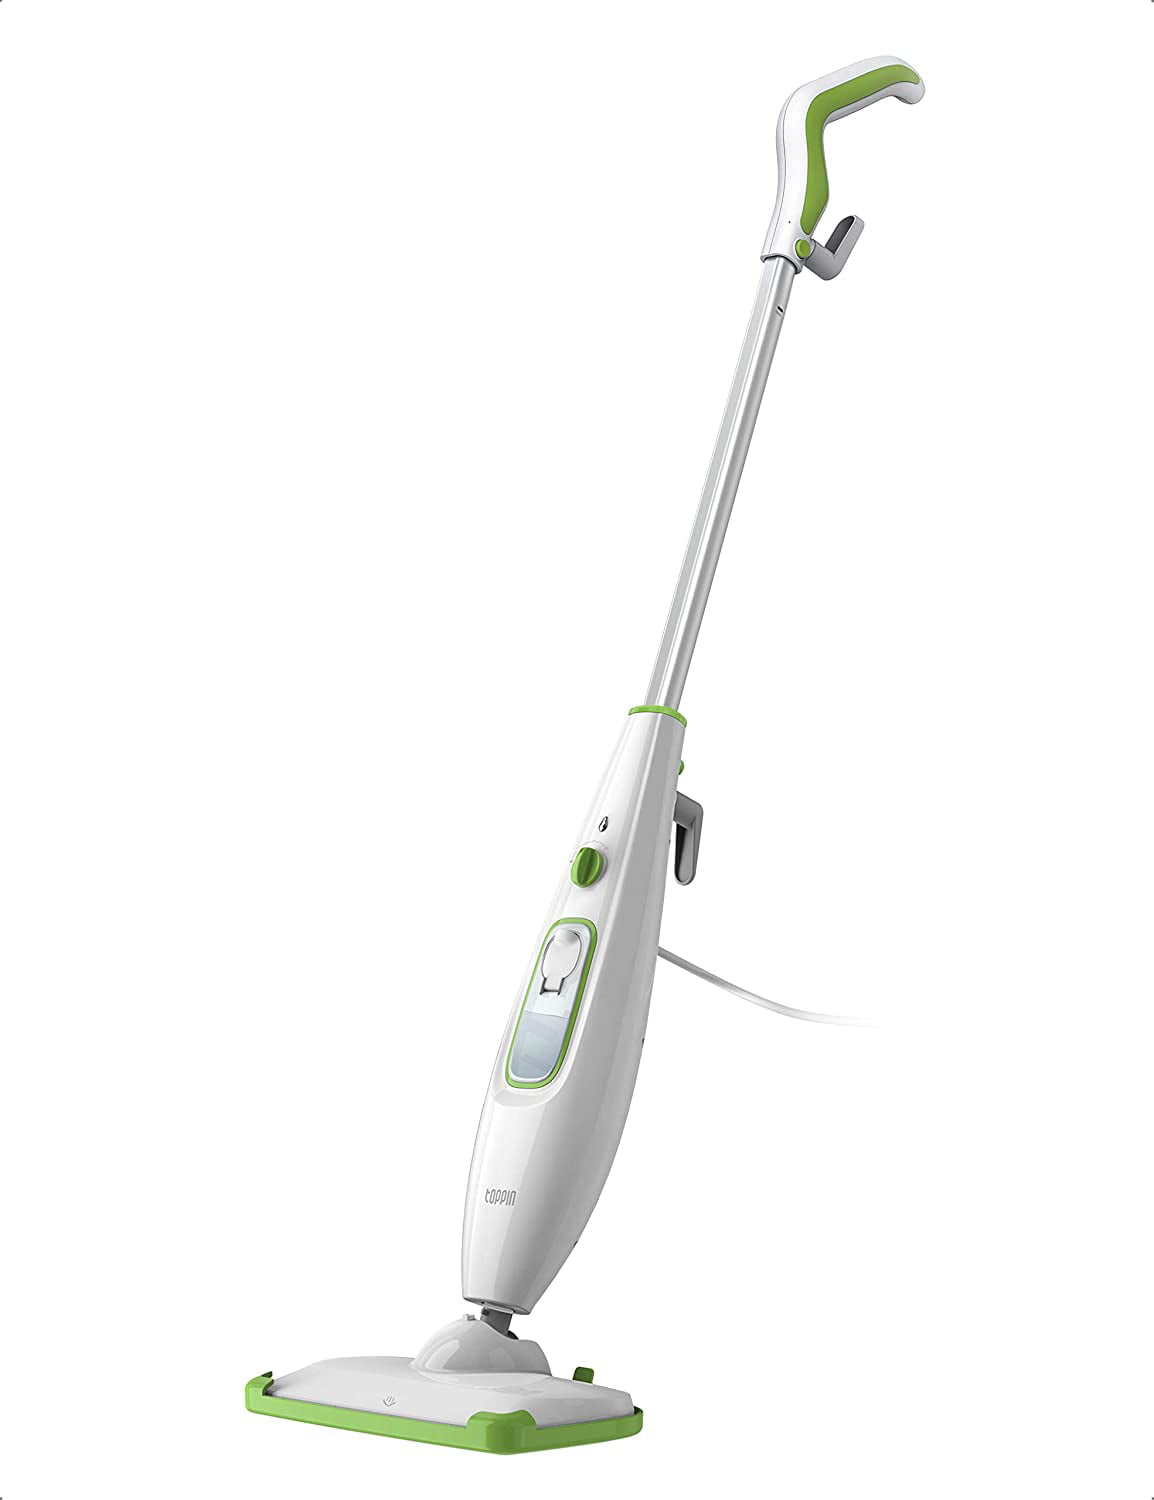 Steam Mop 001,for Hard Floor Cleaning with 2 Mop Pads, 410ml Water Tan